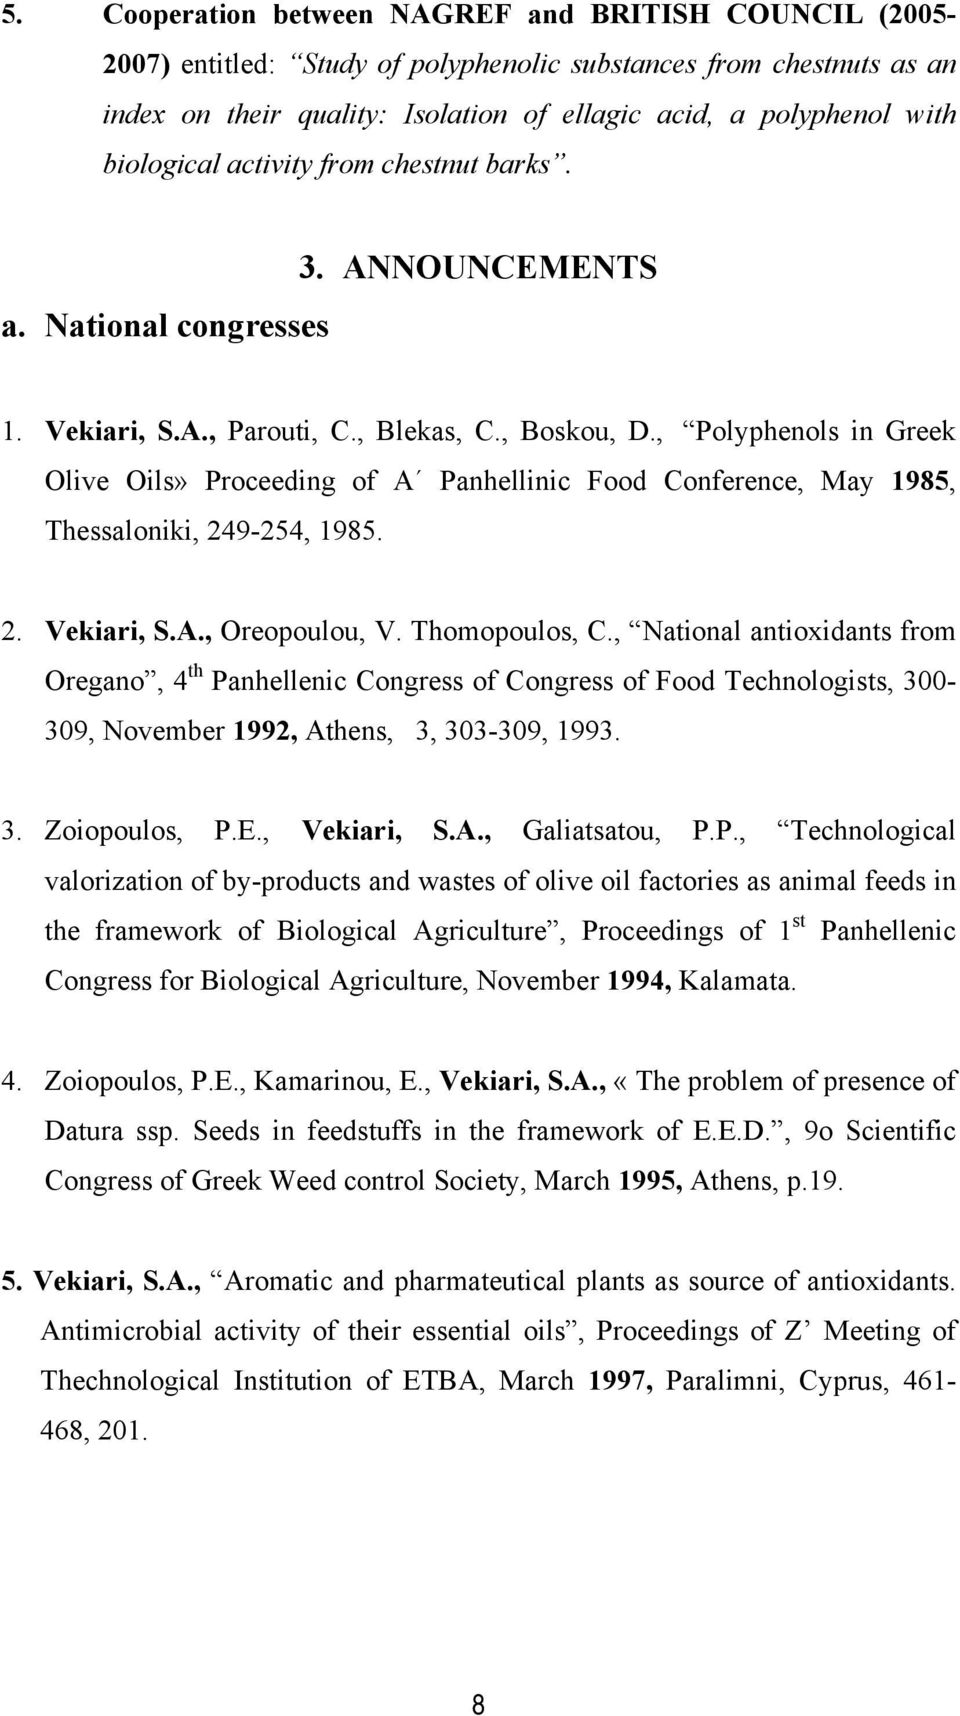 , Polyphenols in Greek Olive Oils» Proceeding of A Panhellinic Food Conference, May 1985, Thessaloniki, 249-254, 1985. 2. Vekiari, S.A., Oreopoulou, V. Thomopoulos, C.